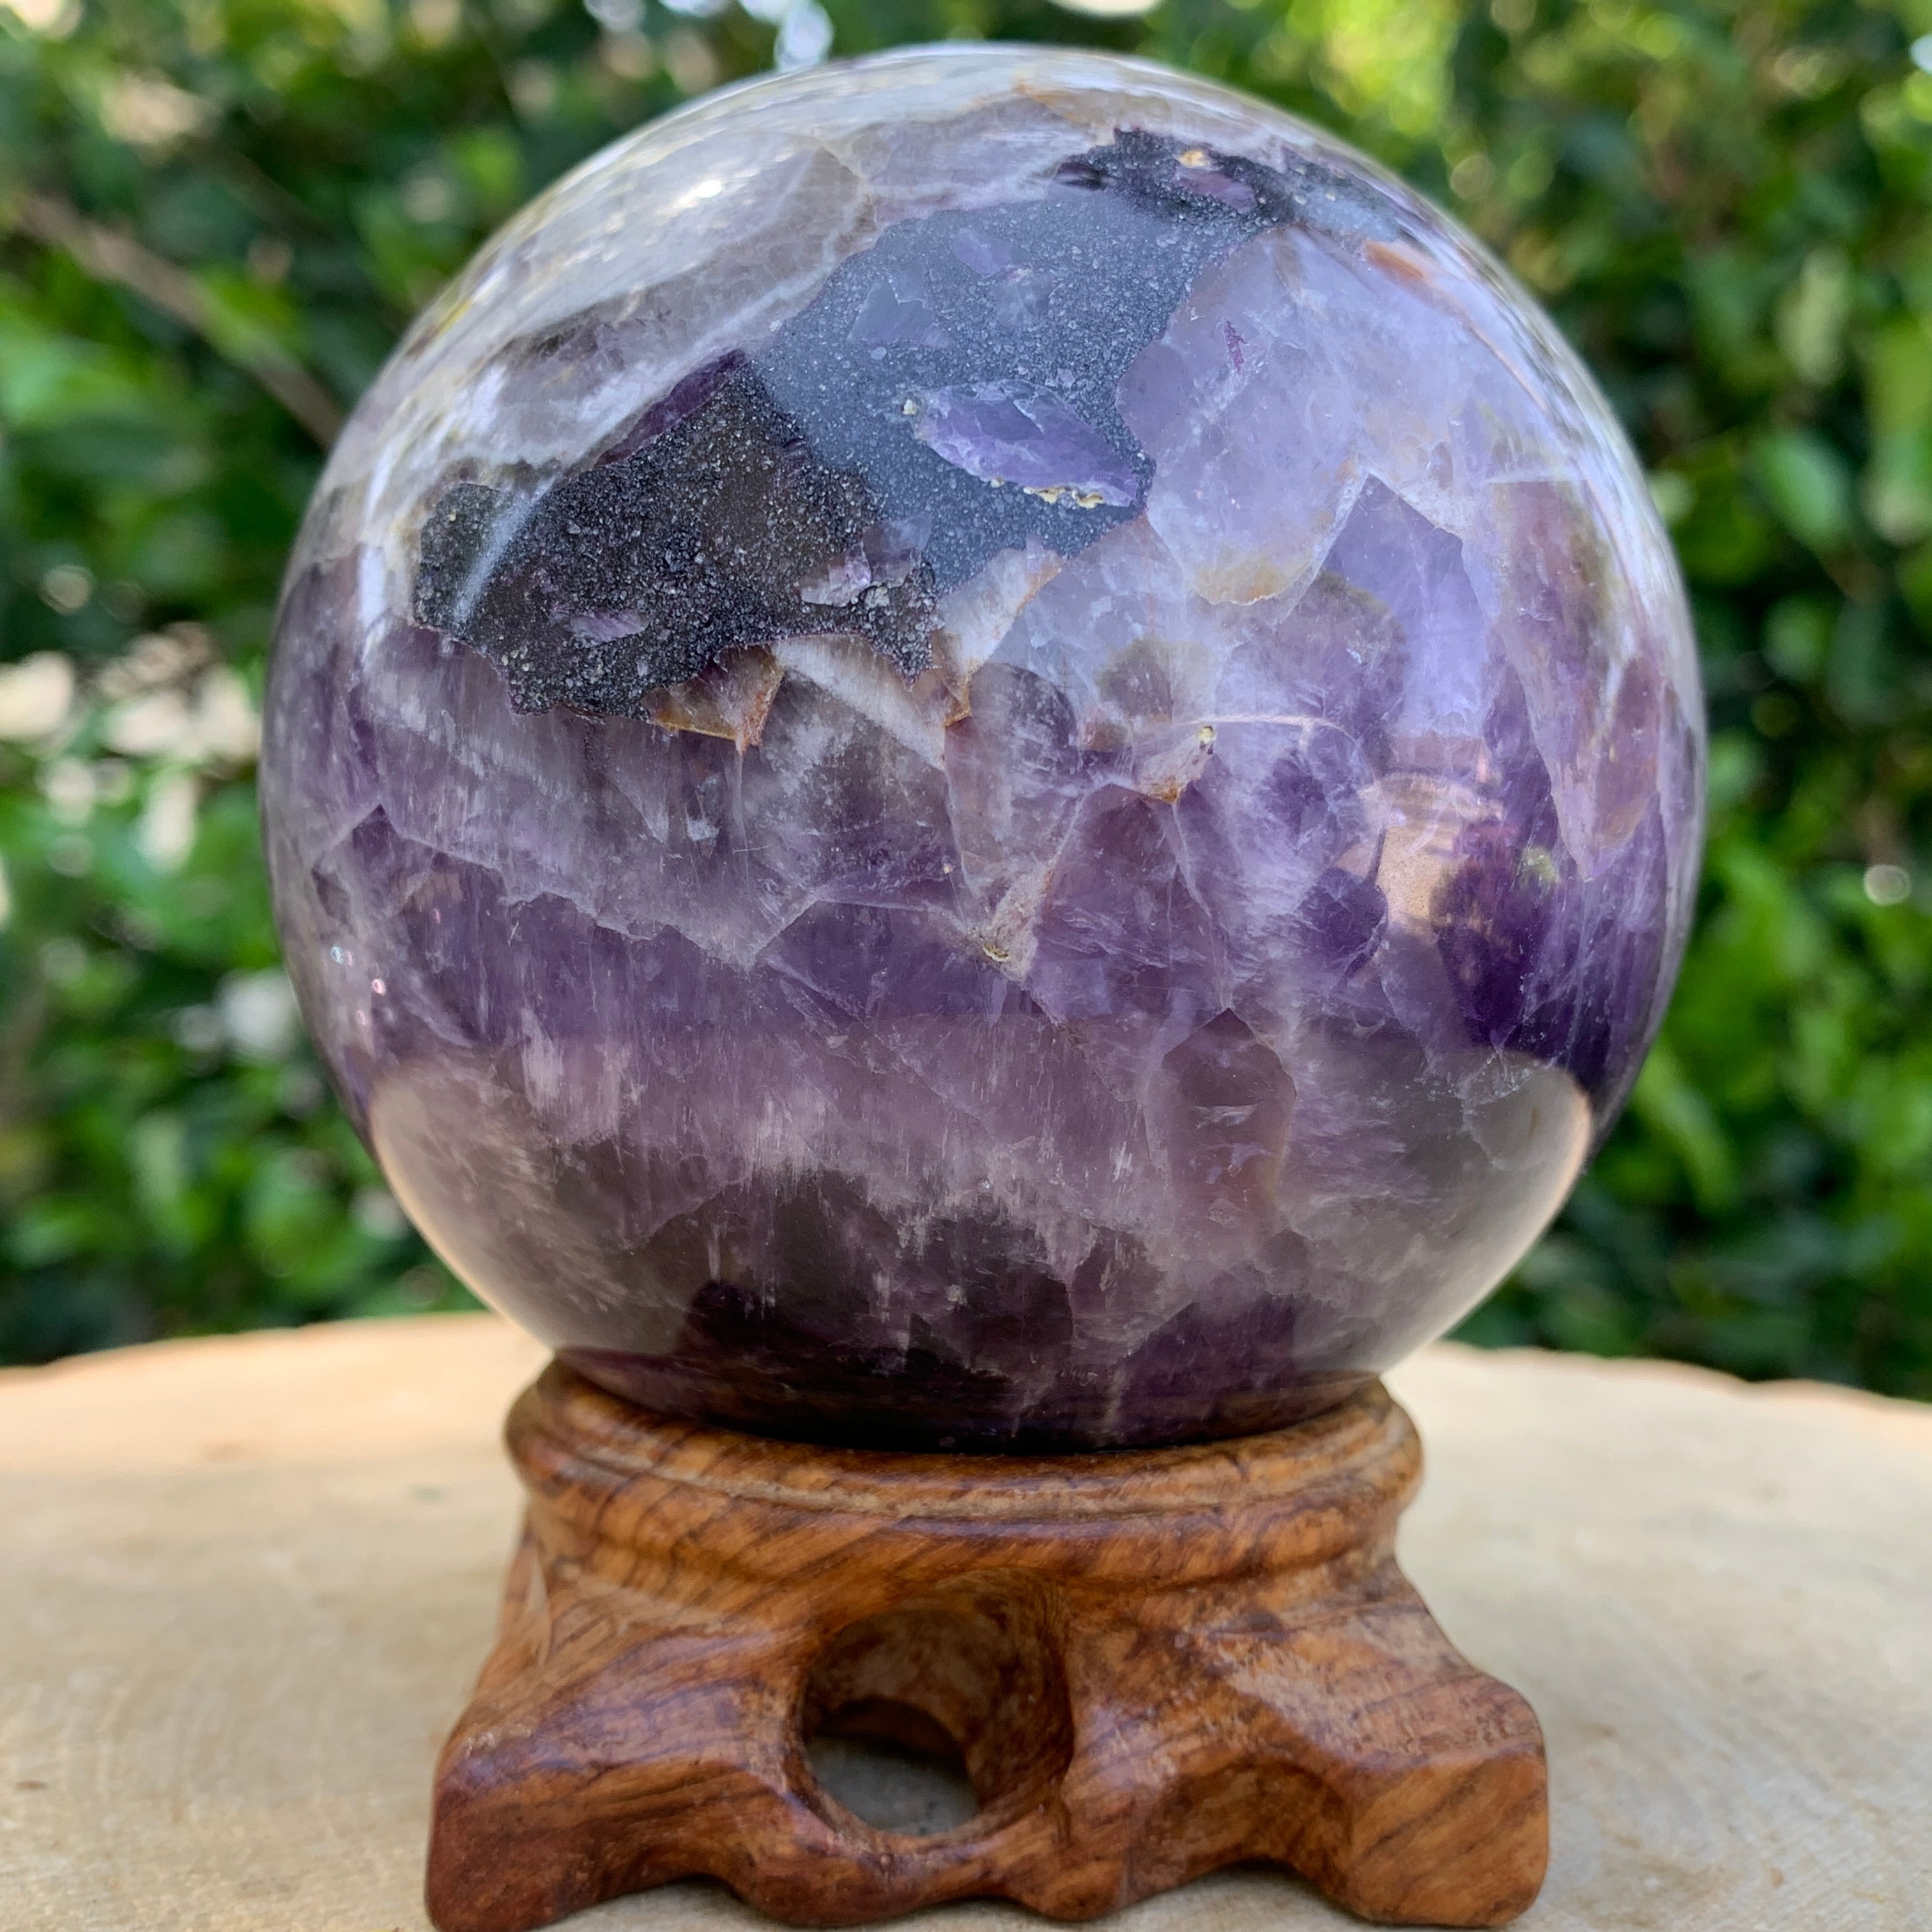 942g 8x8x8cm Purple Banded Chevron Amethyst Sphere from South Africa